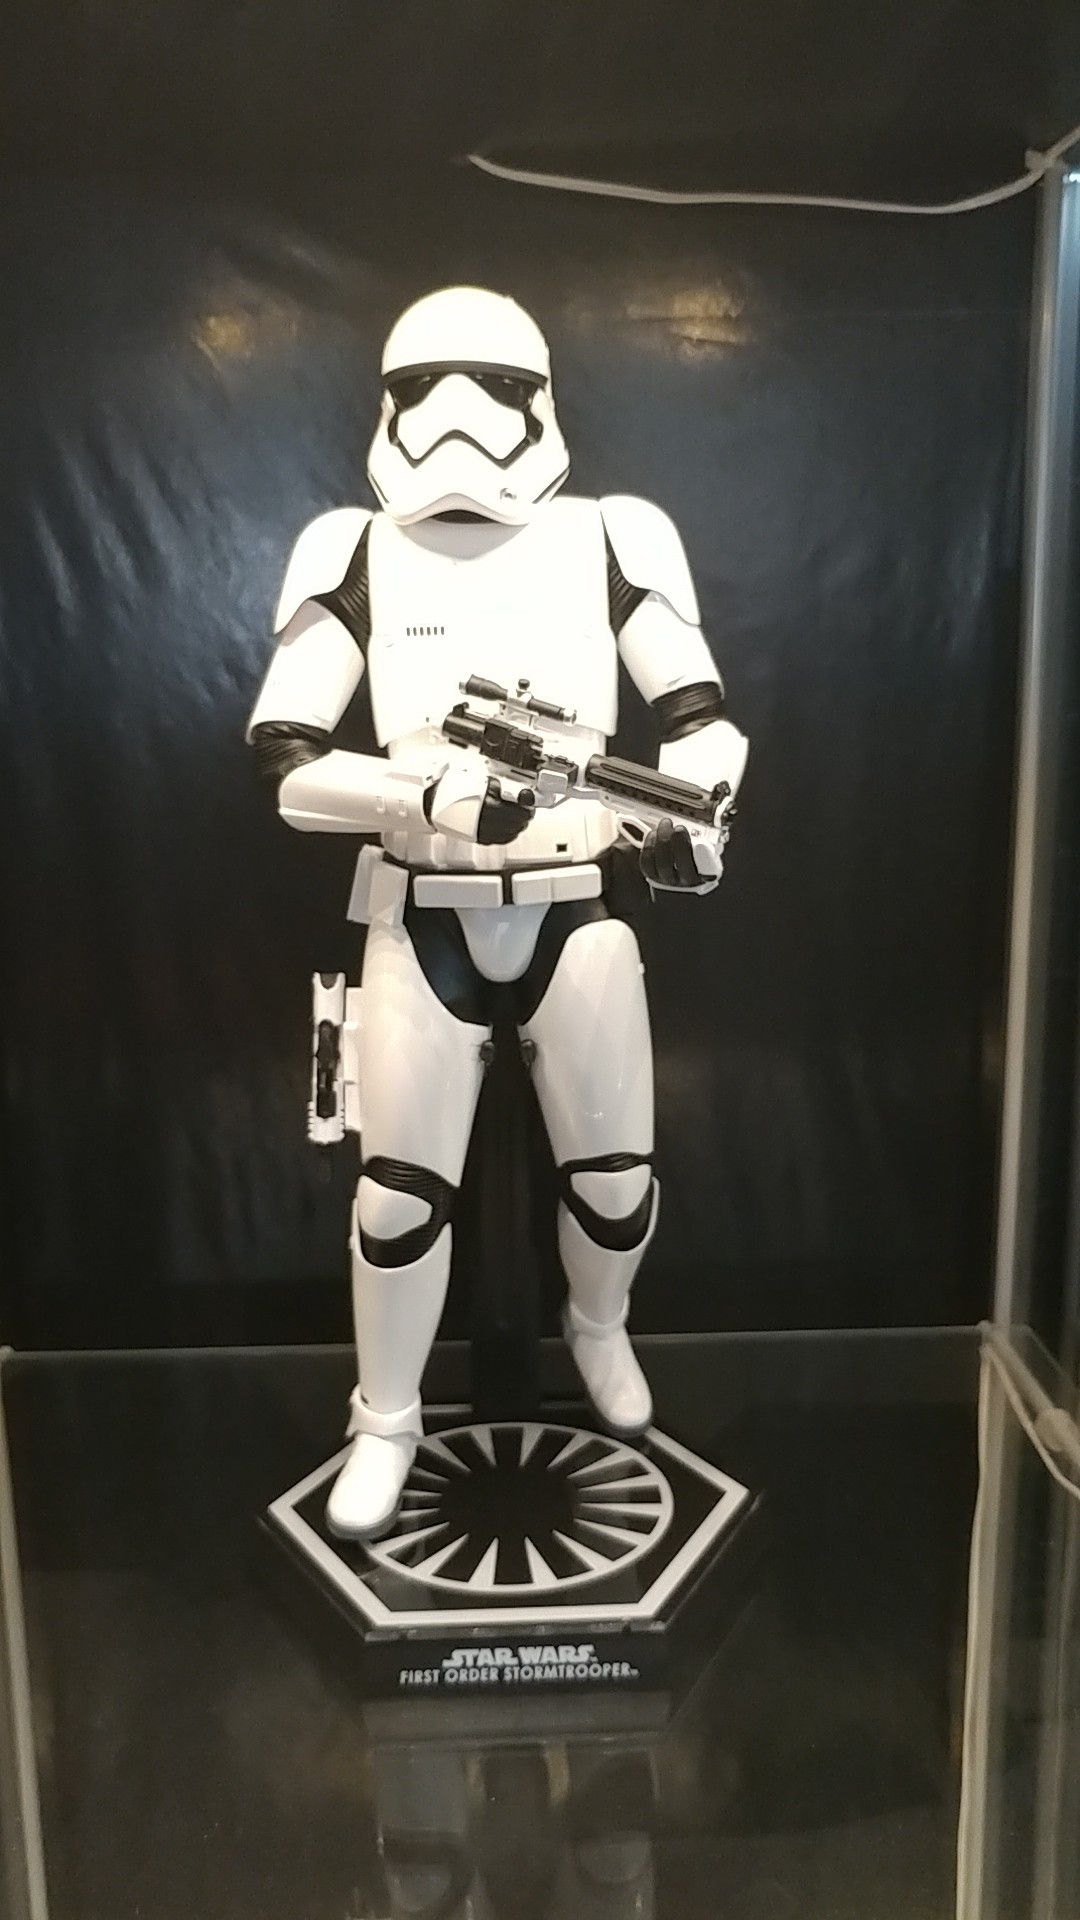 Hot Toys 1:6 scale First Order Stormtrooper